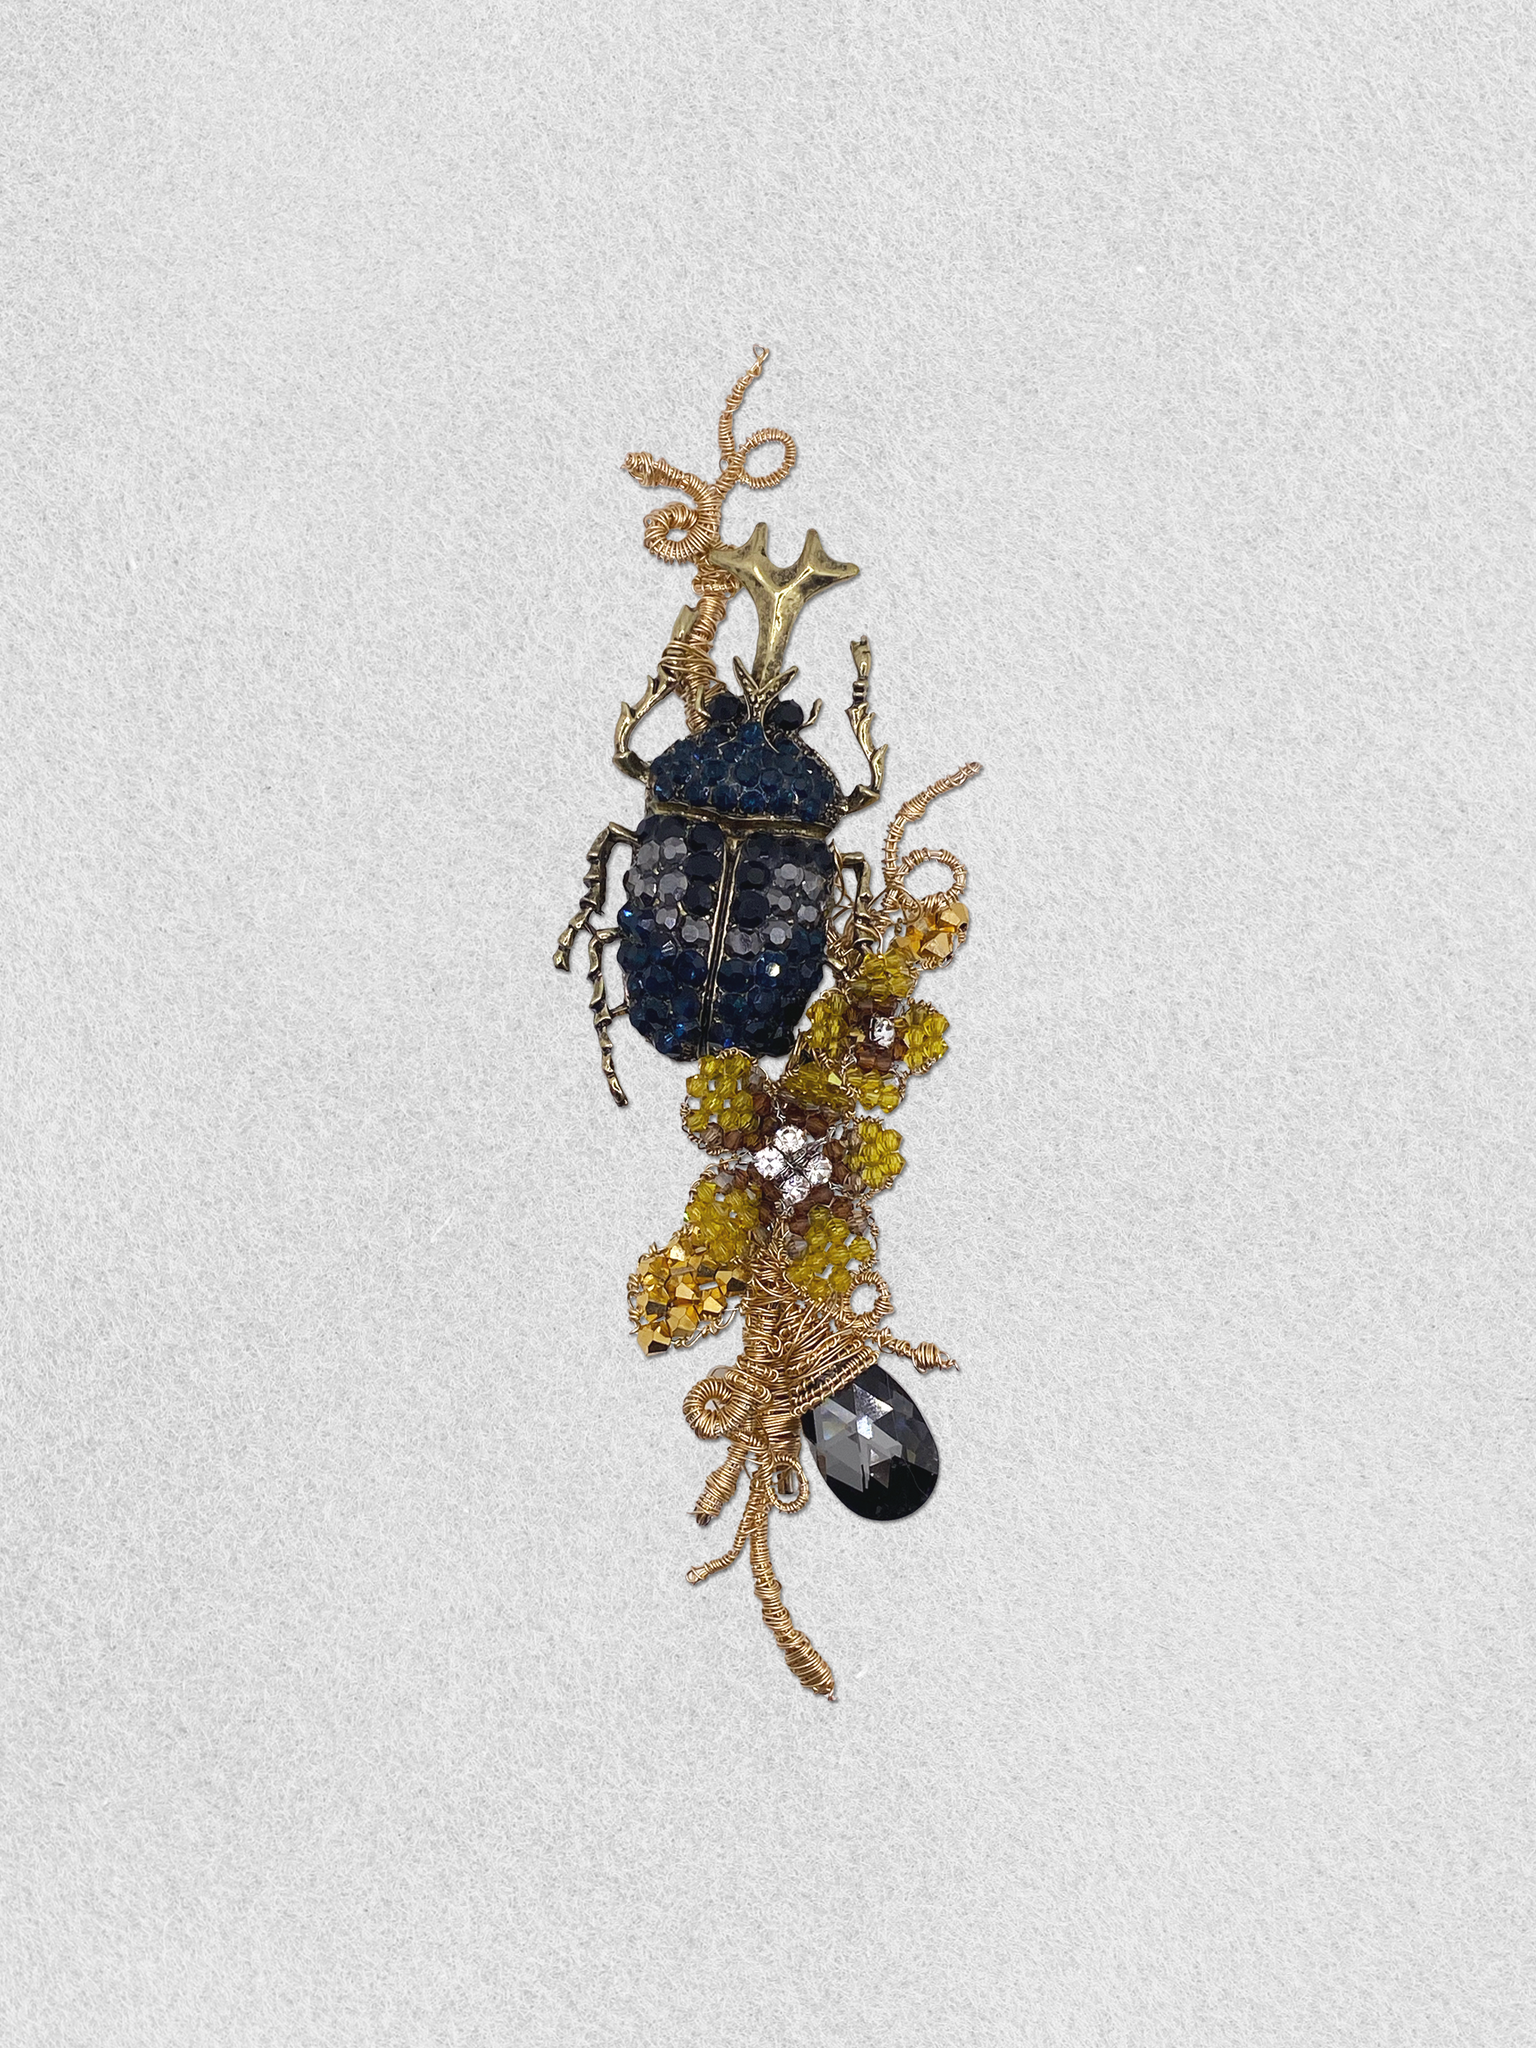 Men's Lapel Pin - Beetle and the Golden Blossoms